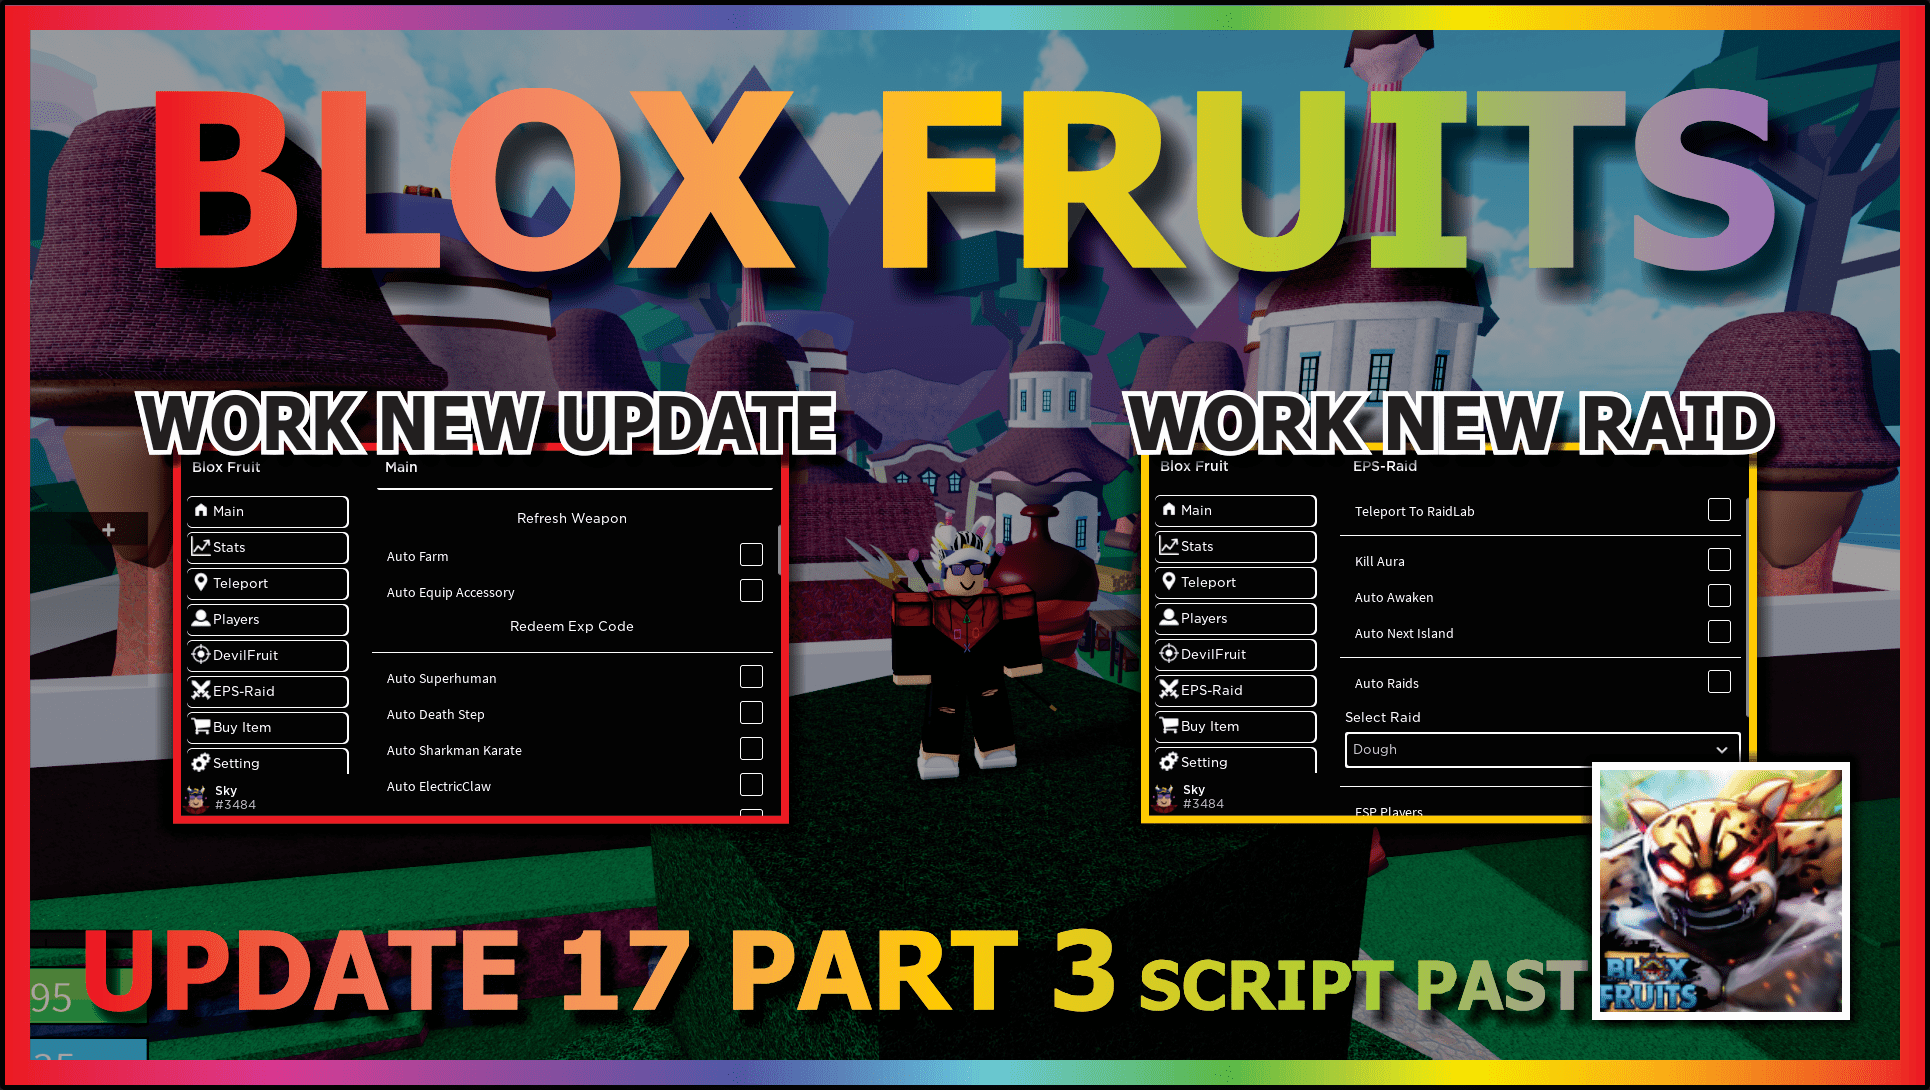 New posts in Blox Fruit chat - Blox Fruits Legacy Community on Game Jolt